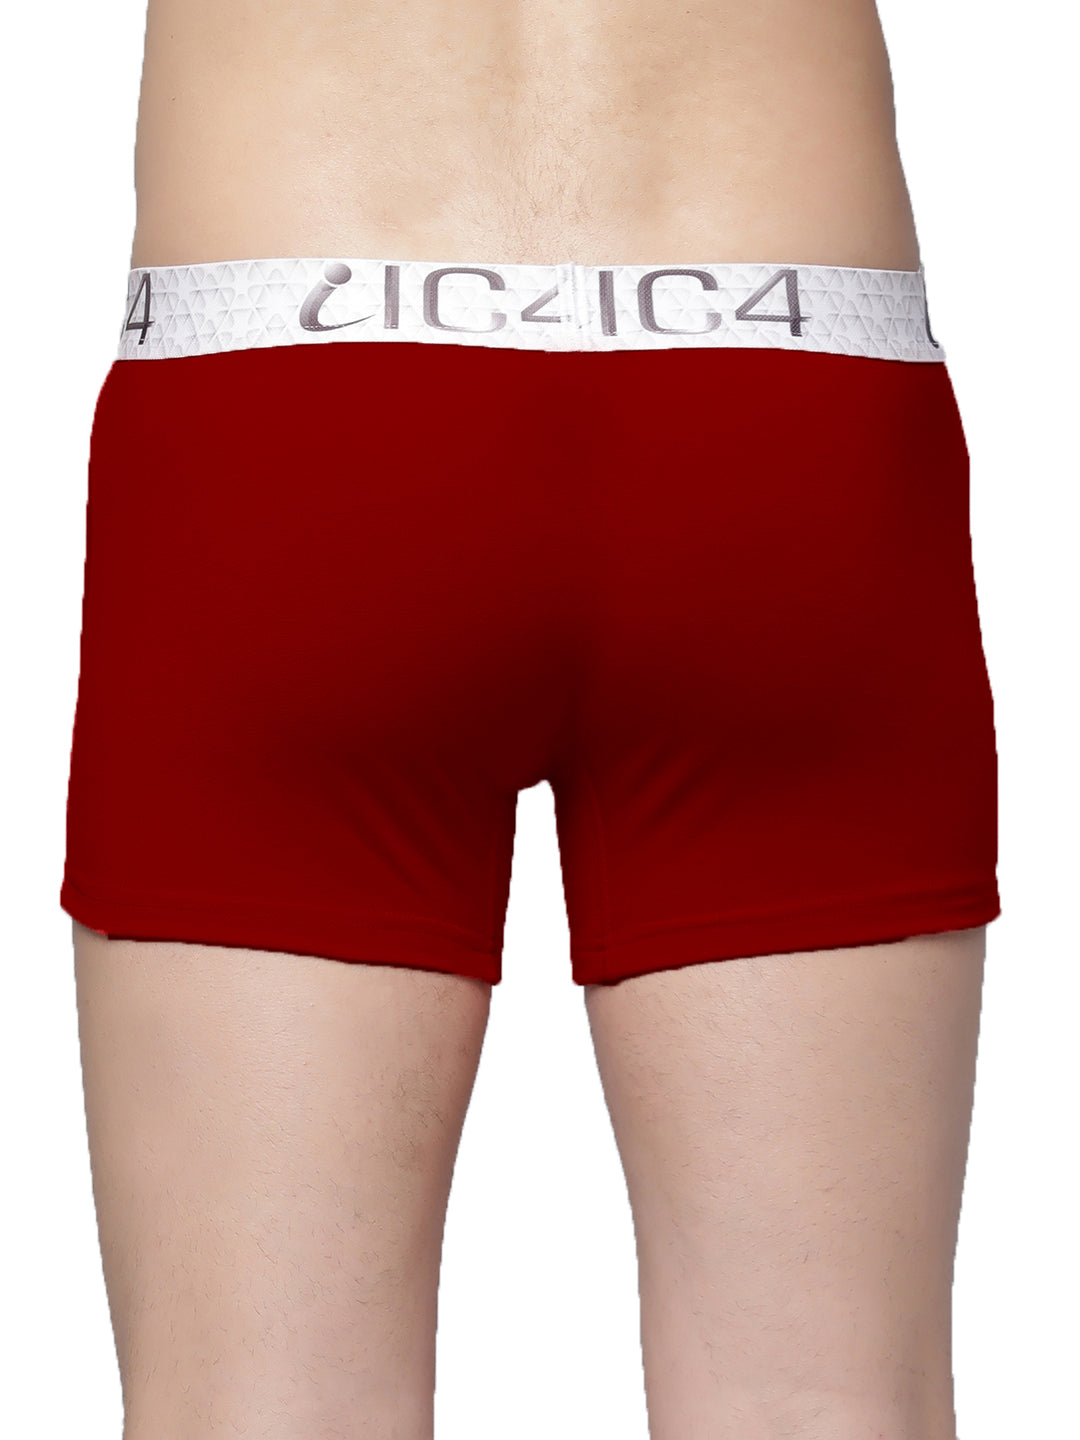 IC4 Men's Environment Friendly Tencel Lyocell Finer Pocket Trunk with Natural Stay fresh Properties